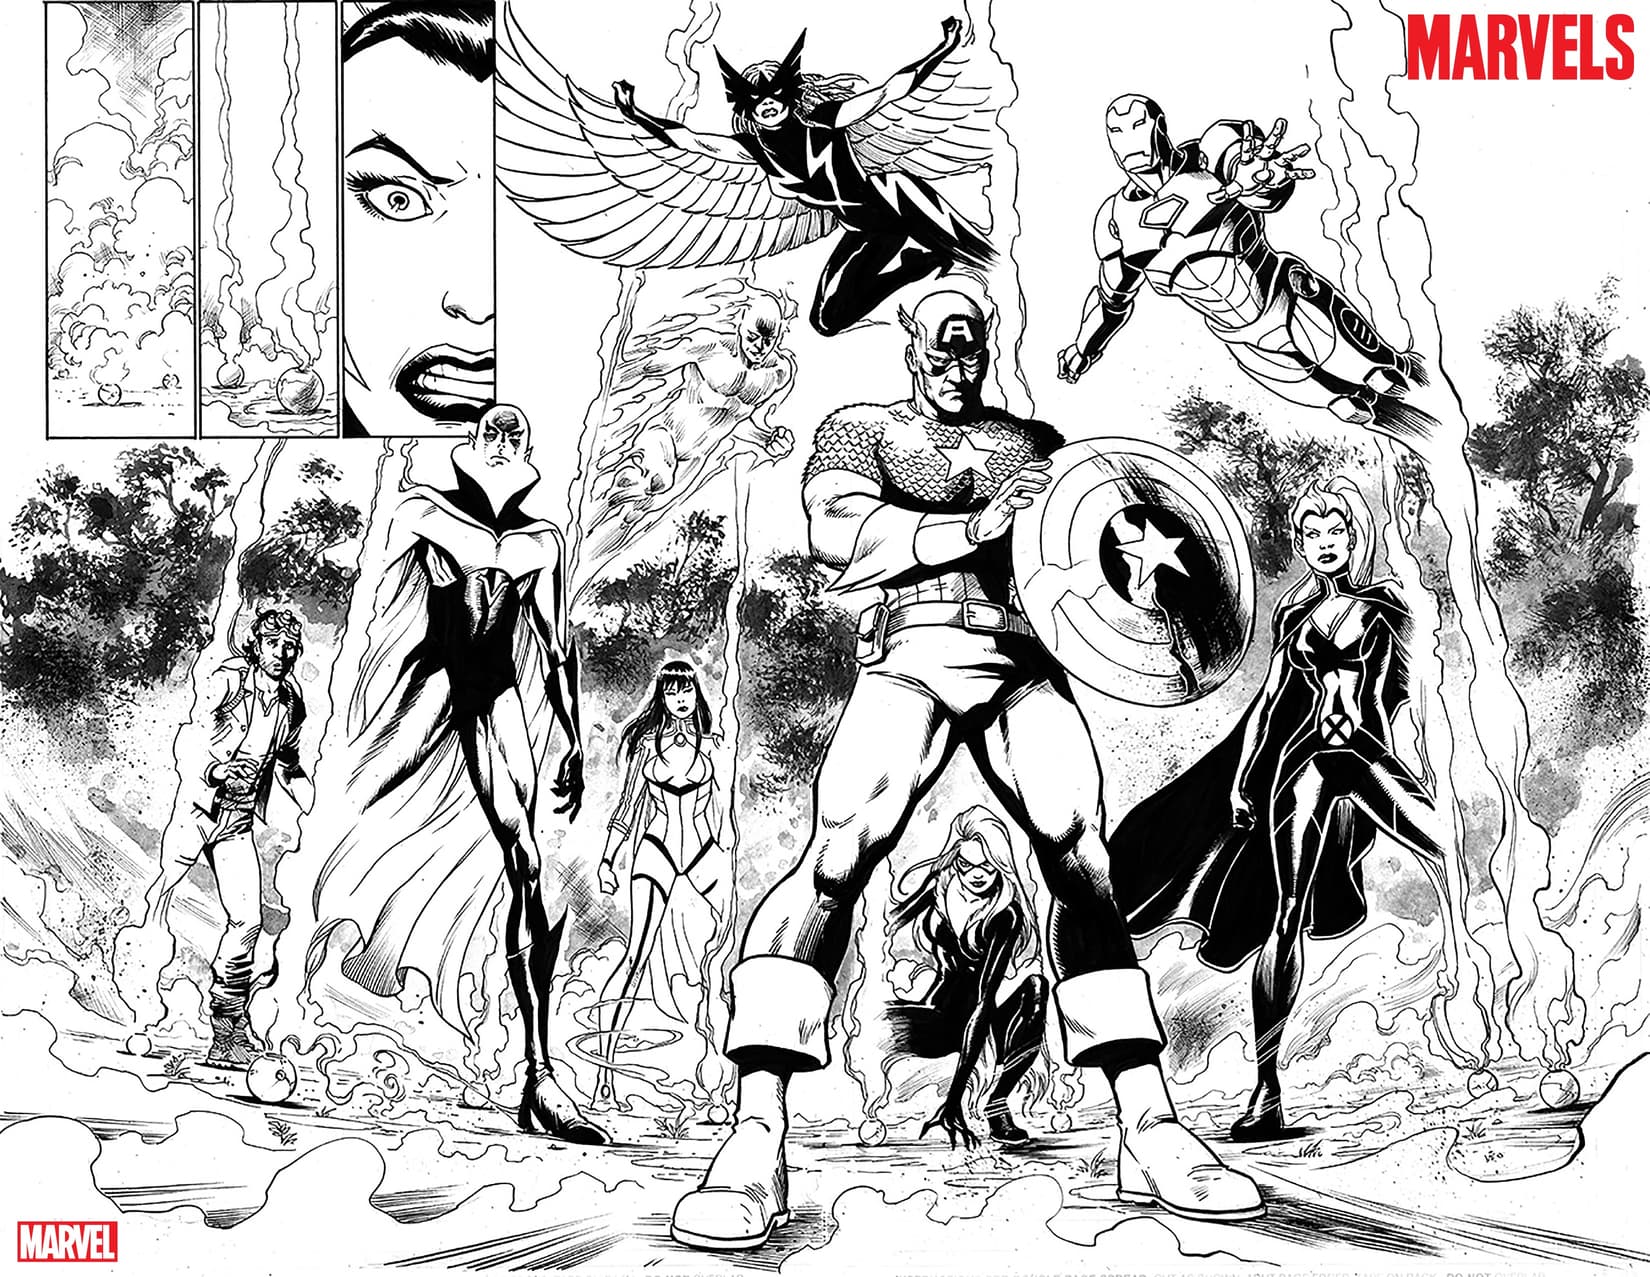 THE MARVELS #1 preview inks by Yildiray Cinar